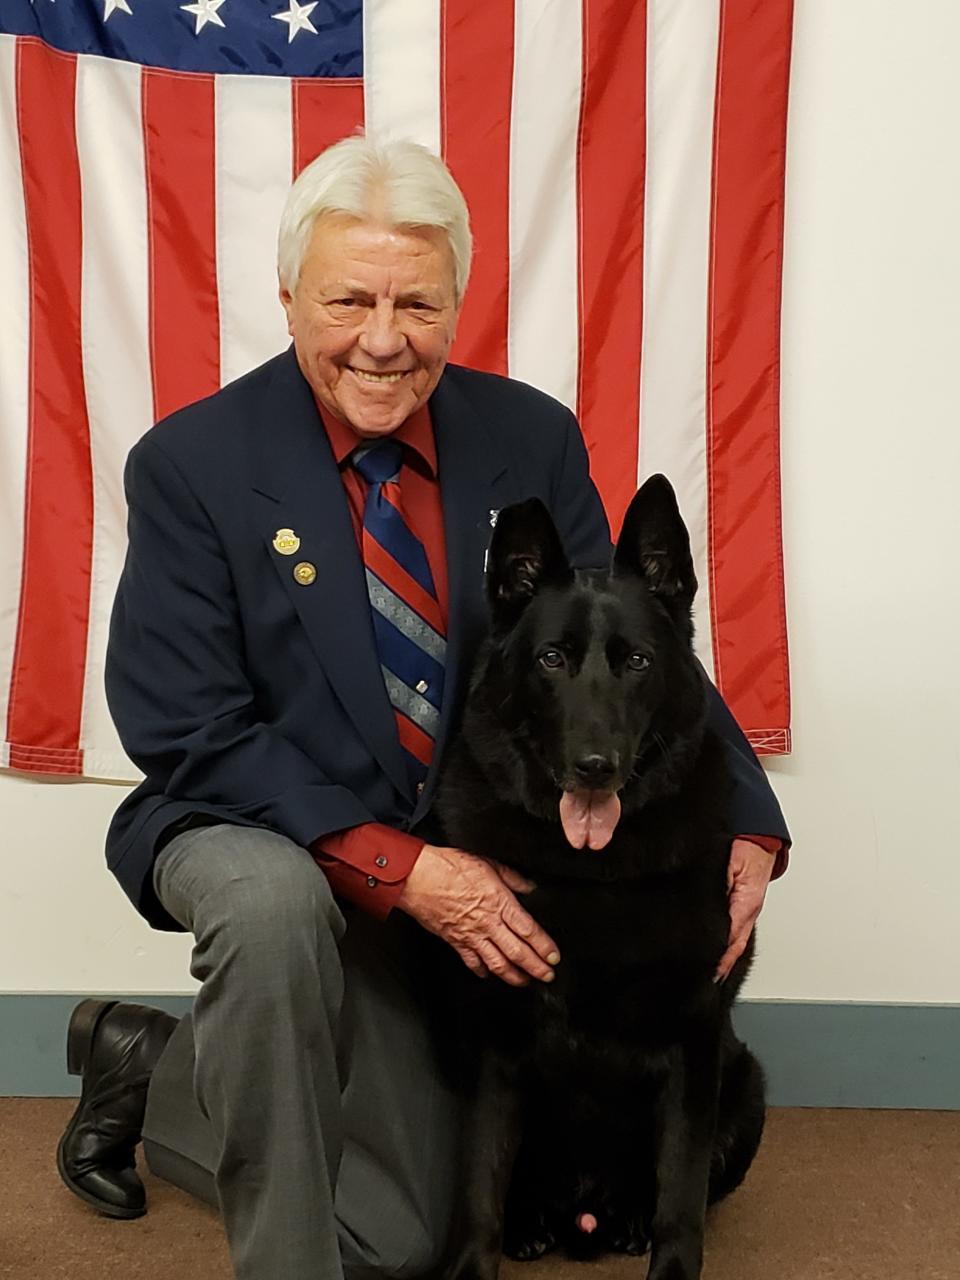 John Meeks with Sgt. 1st Class Brutusz, who was a bomb-sniffing dog for the U.S. Army stationed at Schofield Barracks, Hawaii. Meeks adopted Brutusz when he was retired in 2018 at age 7. Brutusz died on Dec. 6, 2022, and his ashes are interred at the Michigan War Dog Memorial cemetery.